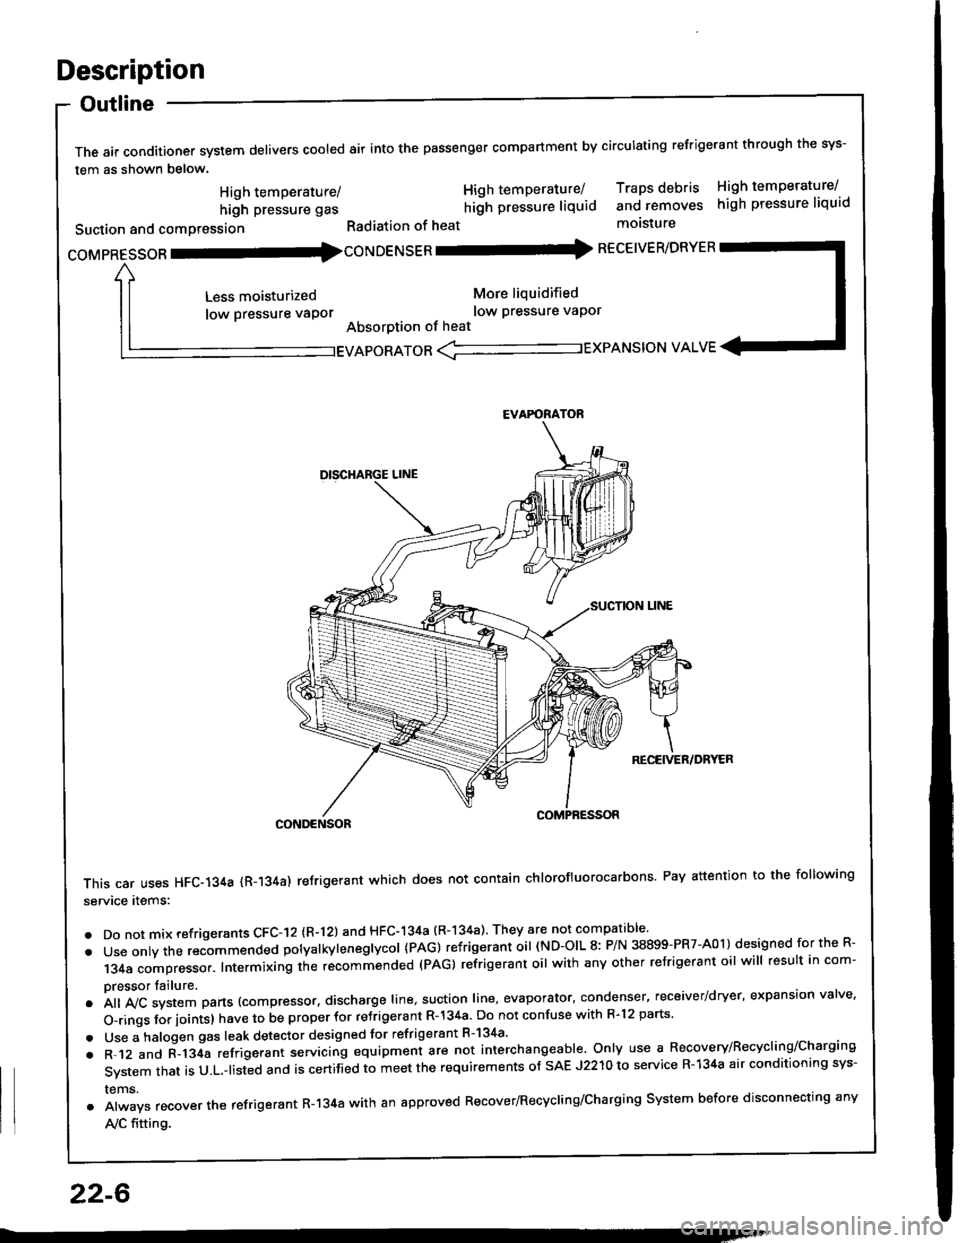 HONDA INTEGRA 1994 4.G Workshop Manual Description
Outline
The air conditioner system delivers cooled air into the passenger compartment by circulating refrigerant through the sys-
tem as shown below.
CONDENSOR
This car uses HFC-134a {R-13